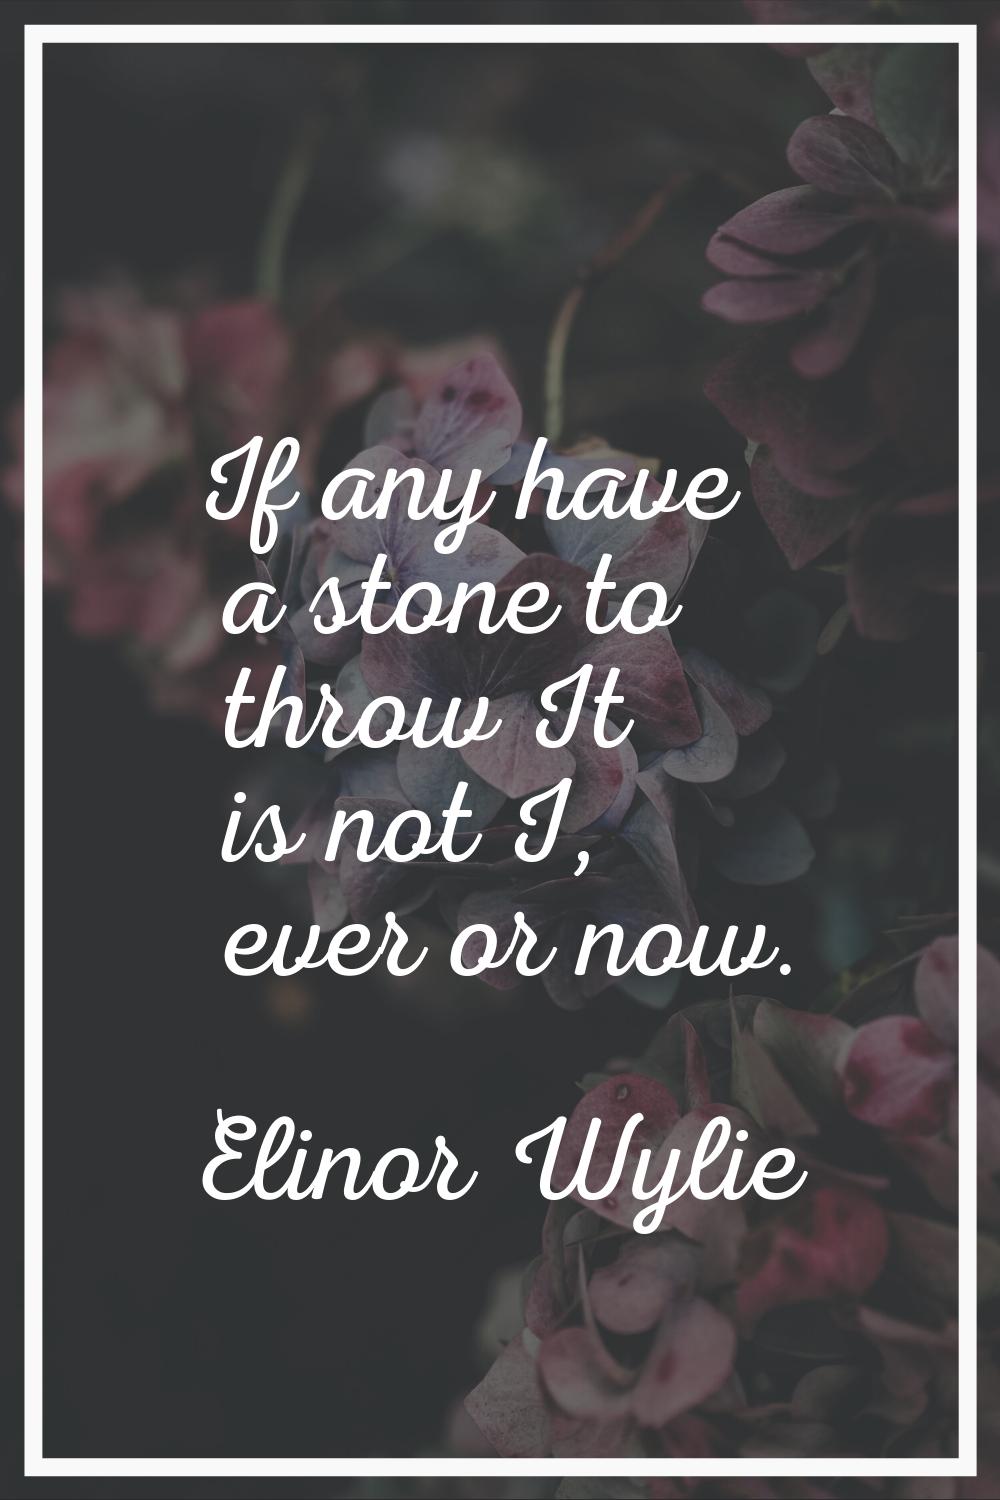 If any have a stone to throw It is not I, ever or now.